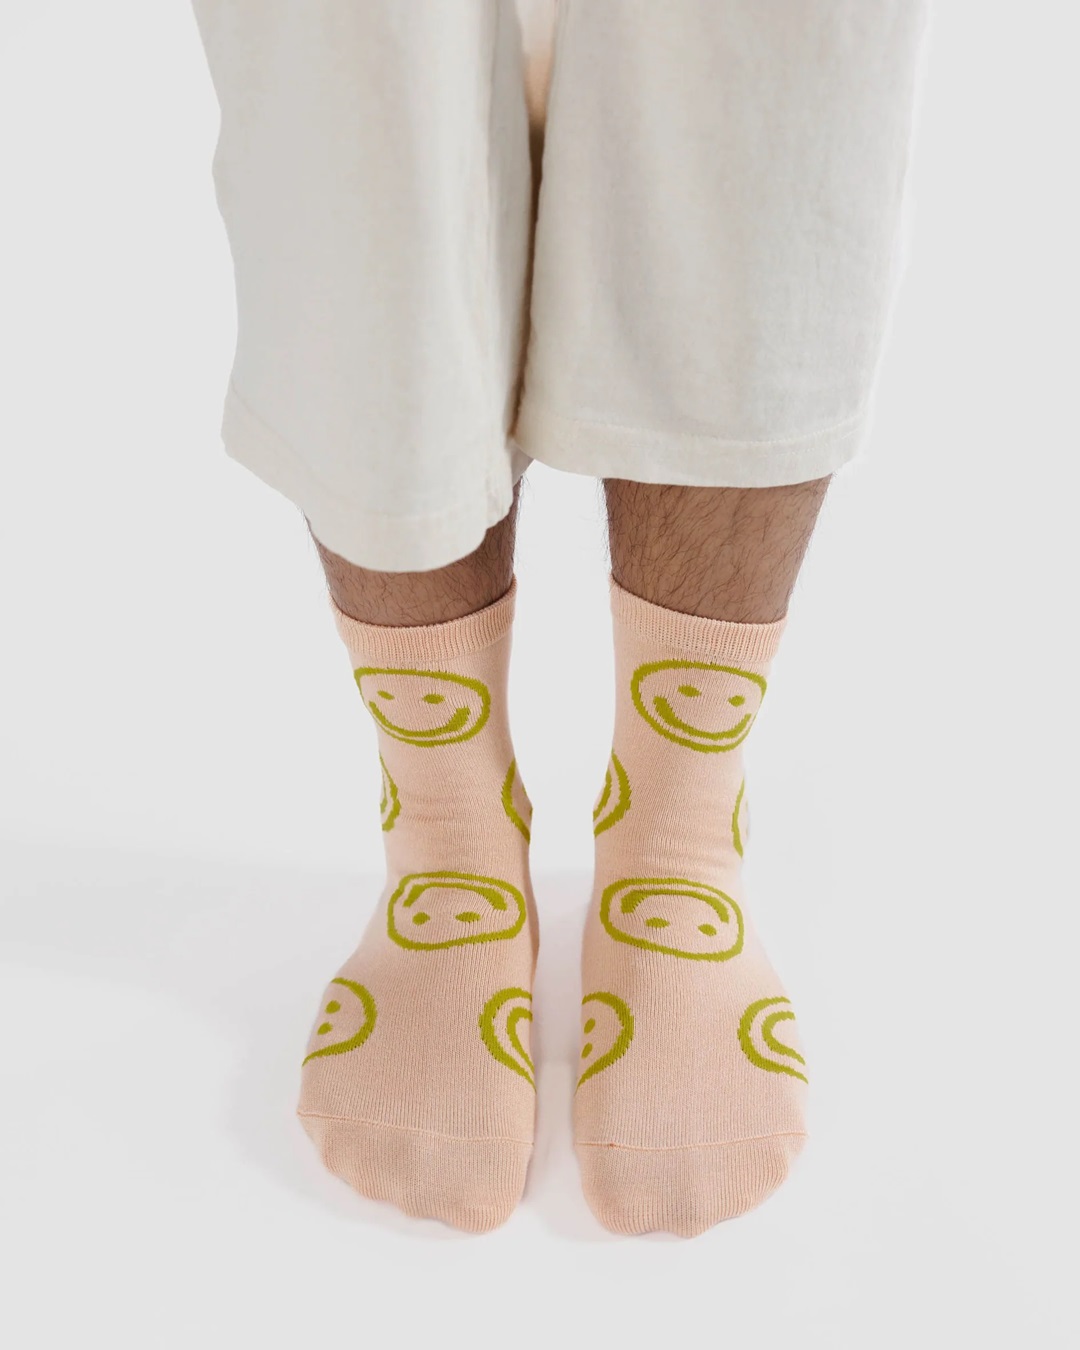 Light pink with green smiley faces pair of socks on feet